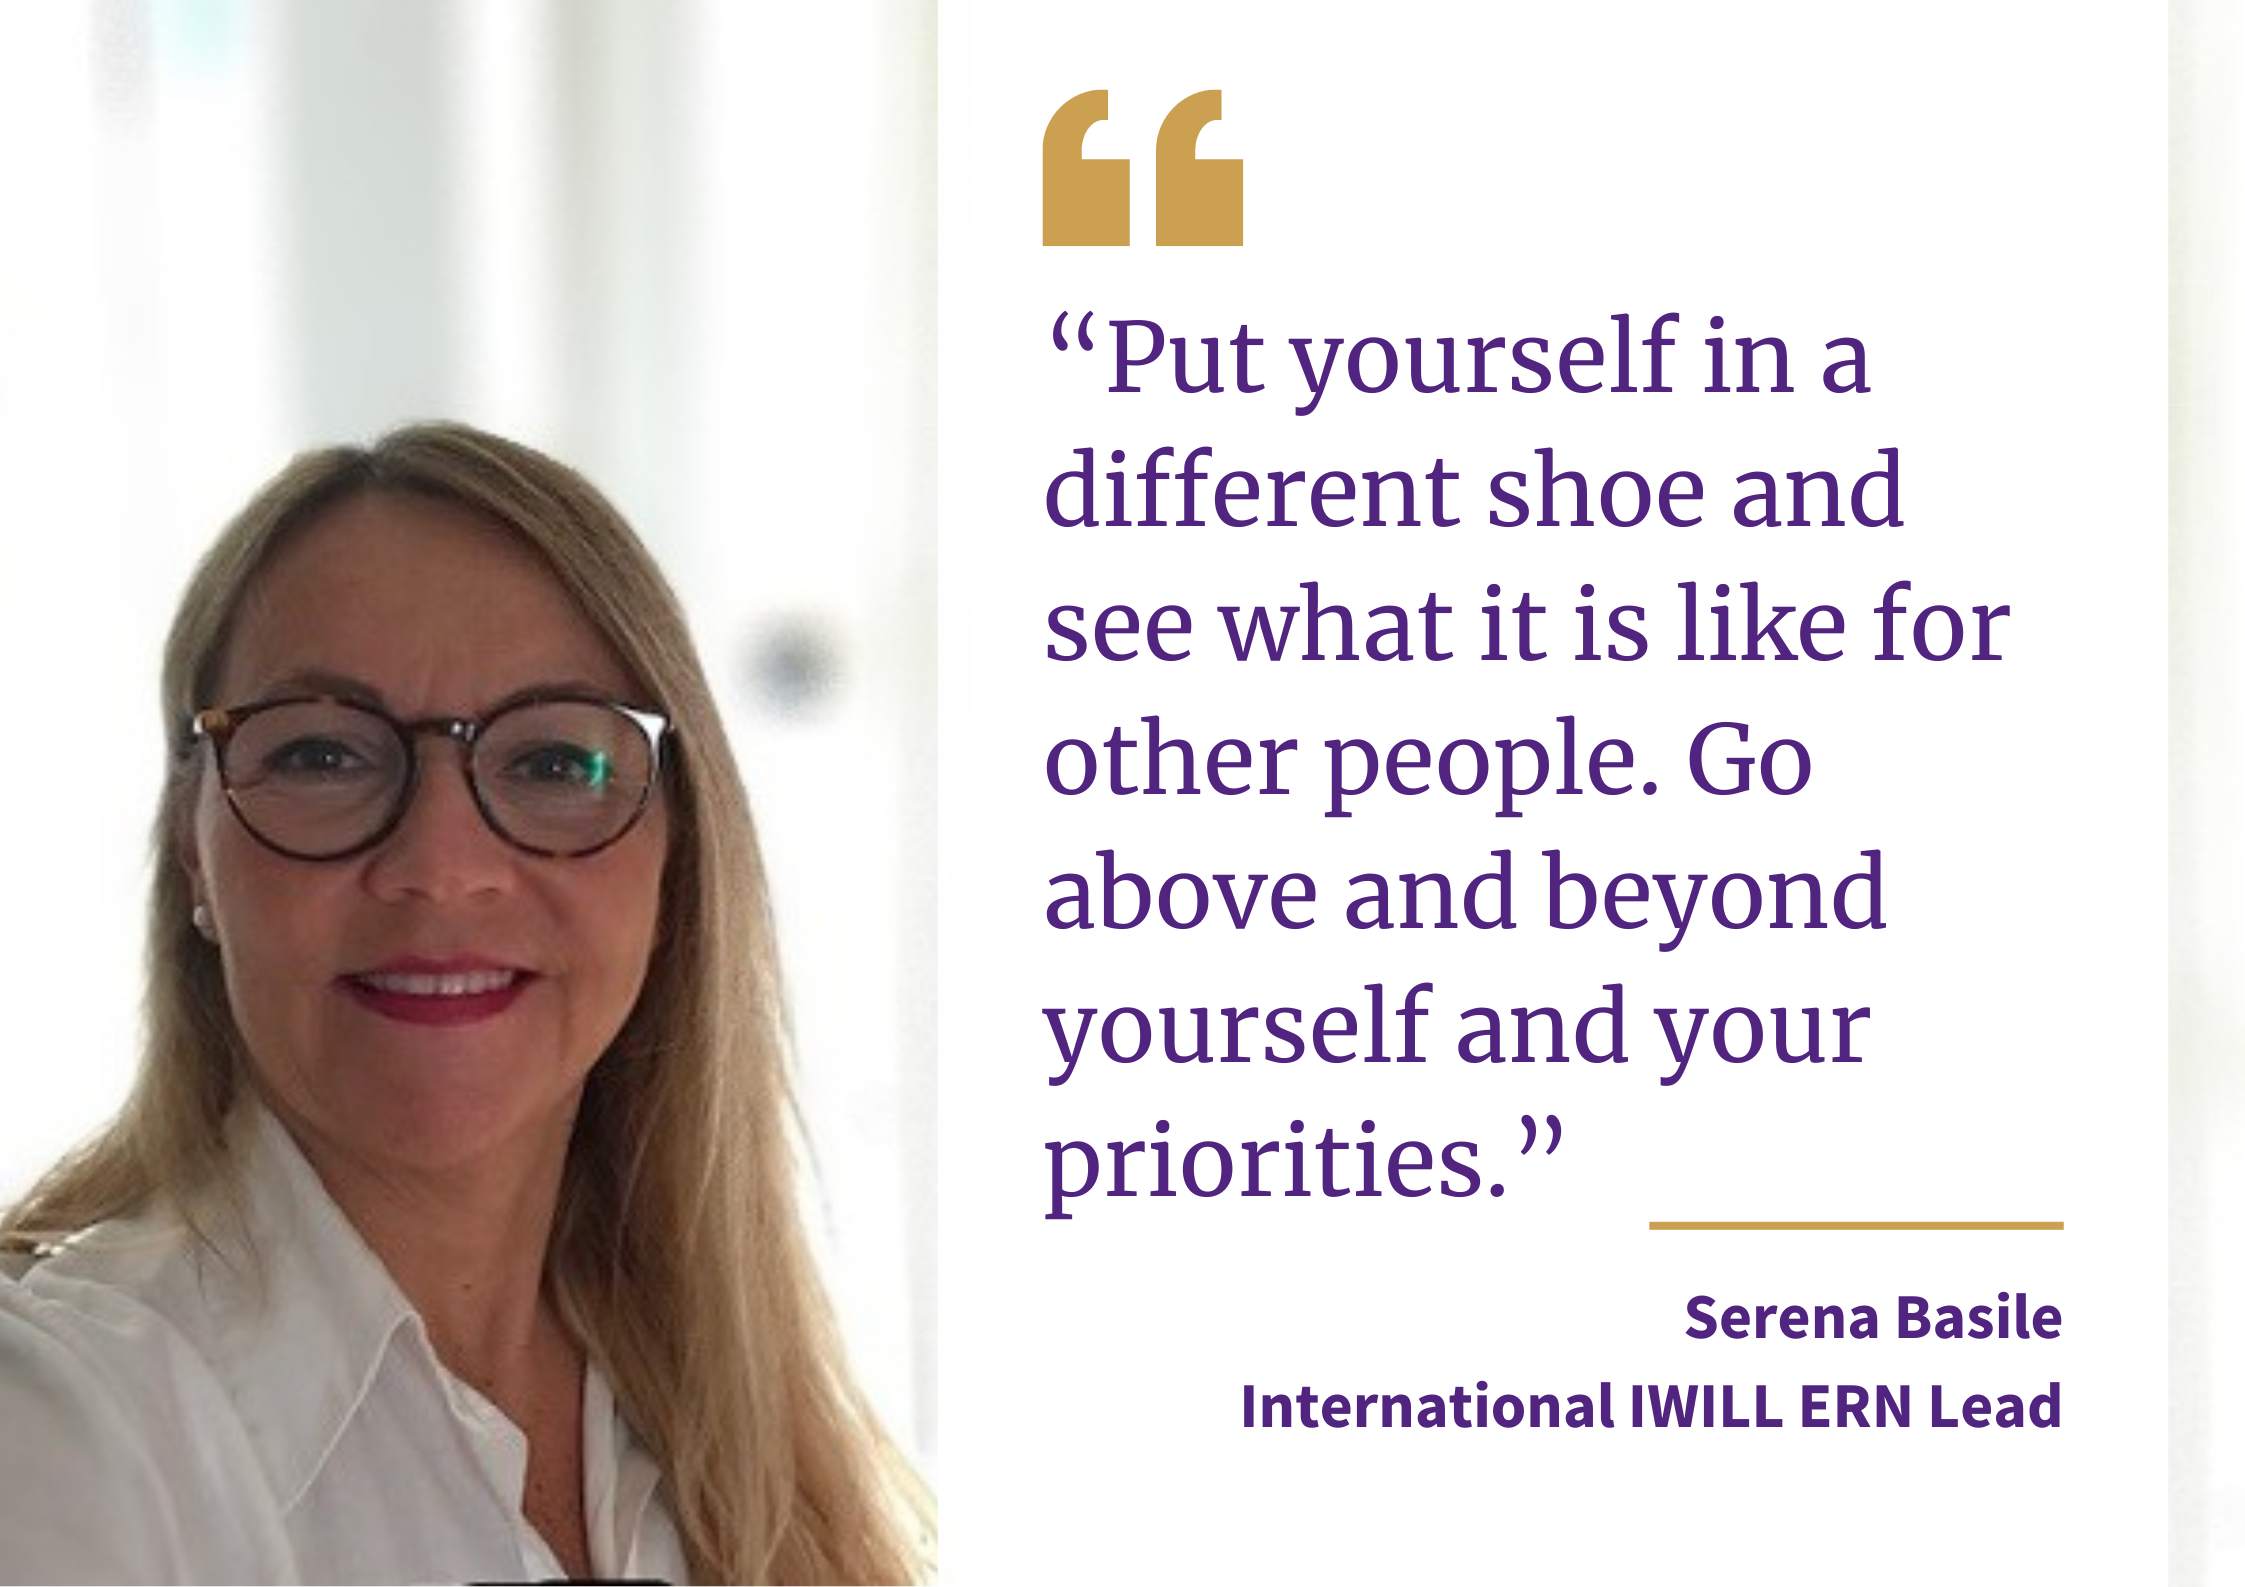 An image of Serena Basile with a quote that says "Put yourself in a different shoe and see what it is like for other people. Go above and beyond yourself and your priorities."